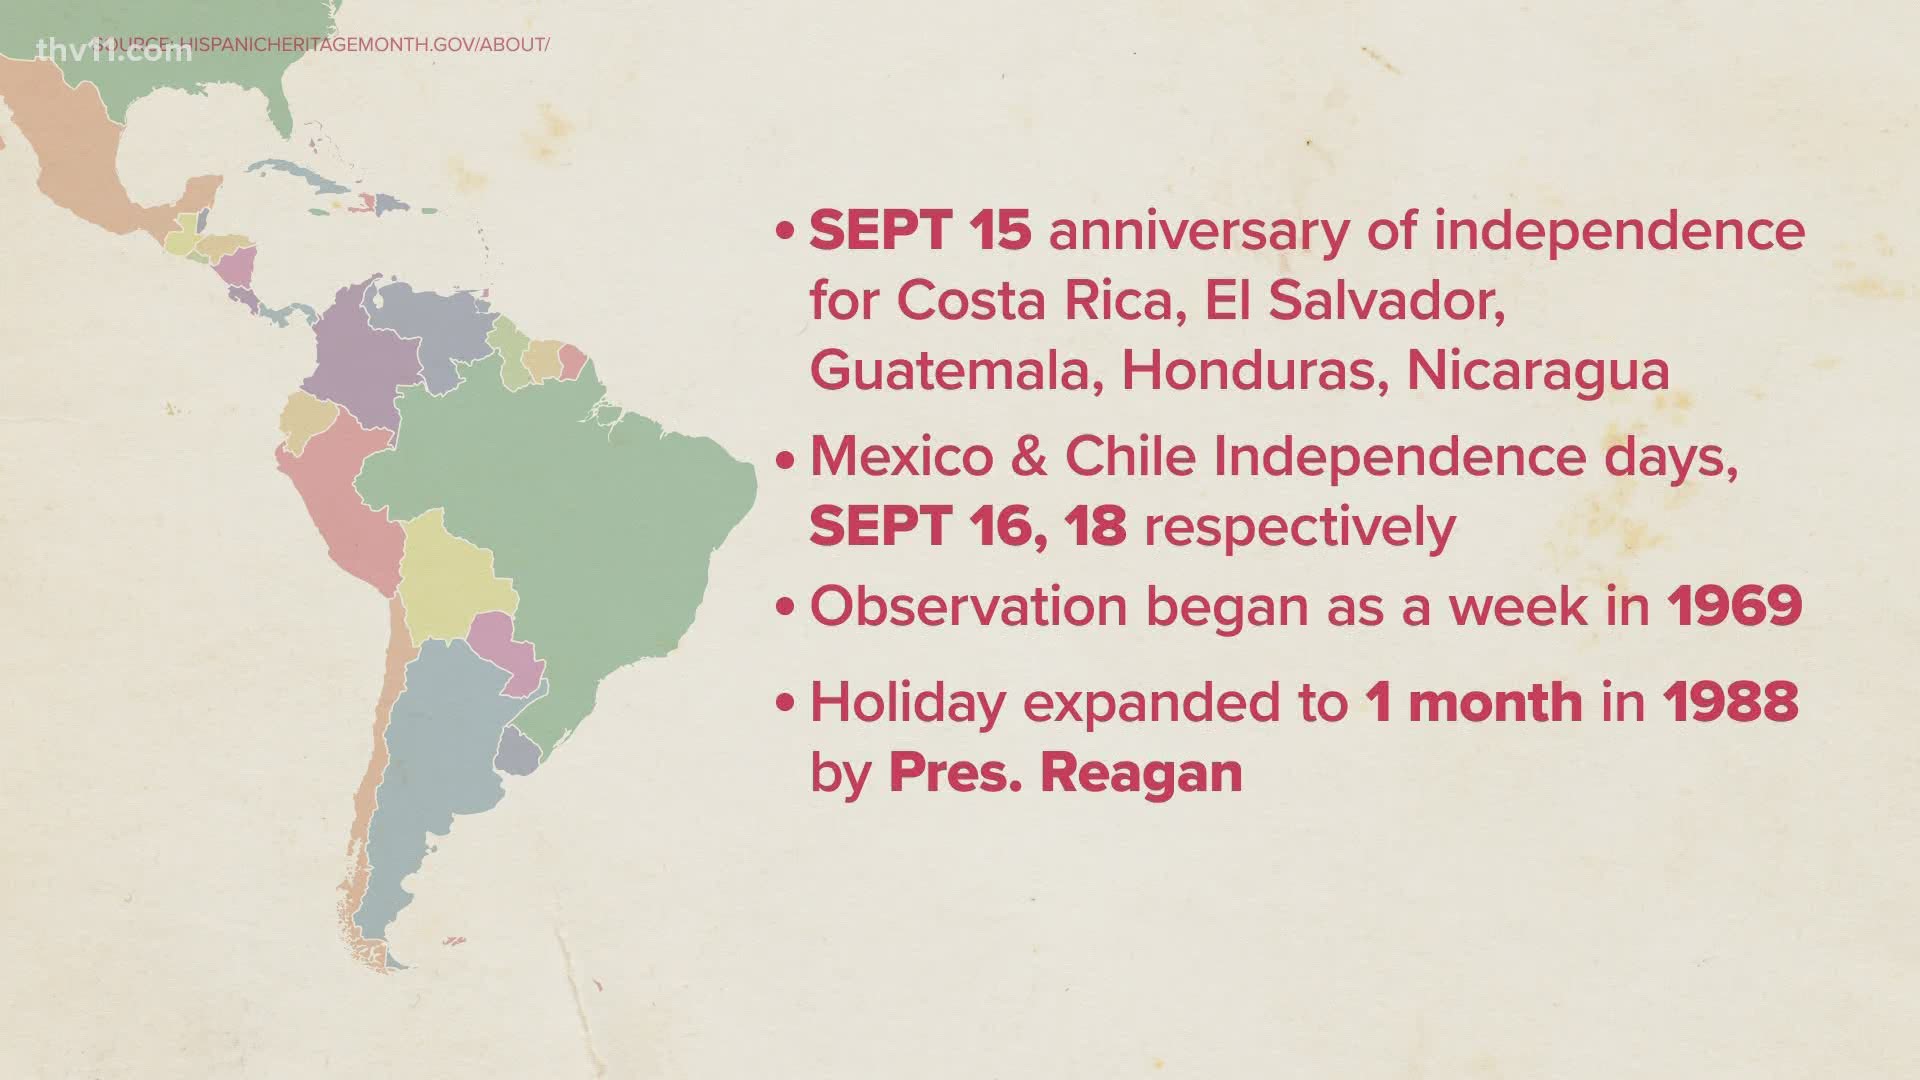 National Hispanic Heritage Month is from Sept. 15 to Oct. 15 and recognizes the largest ethnic or racial minority group in the United States.